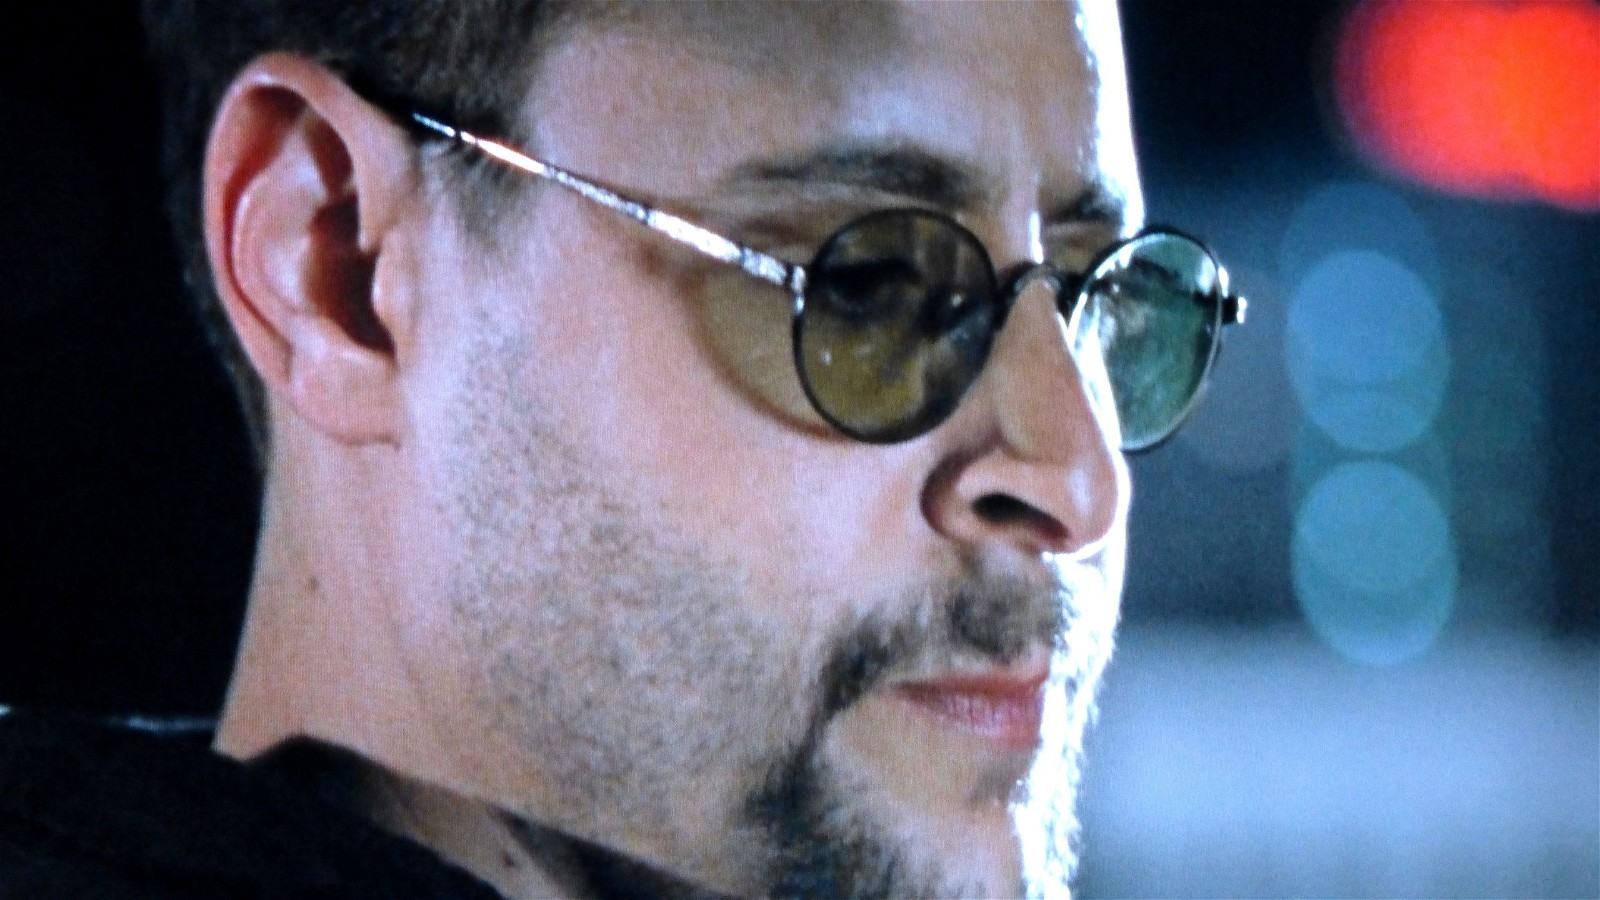 Judd nelson in 1991's New Jack City